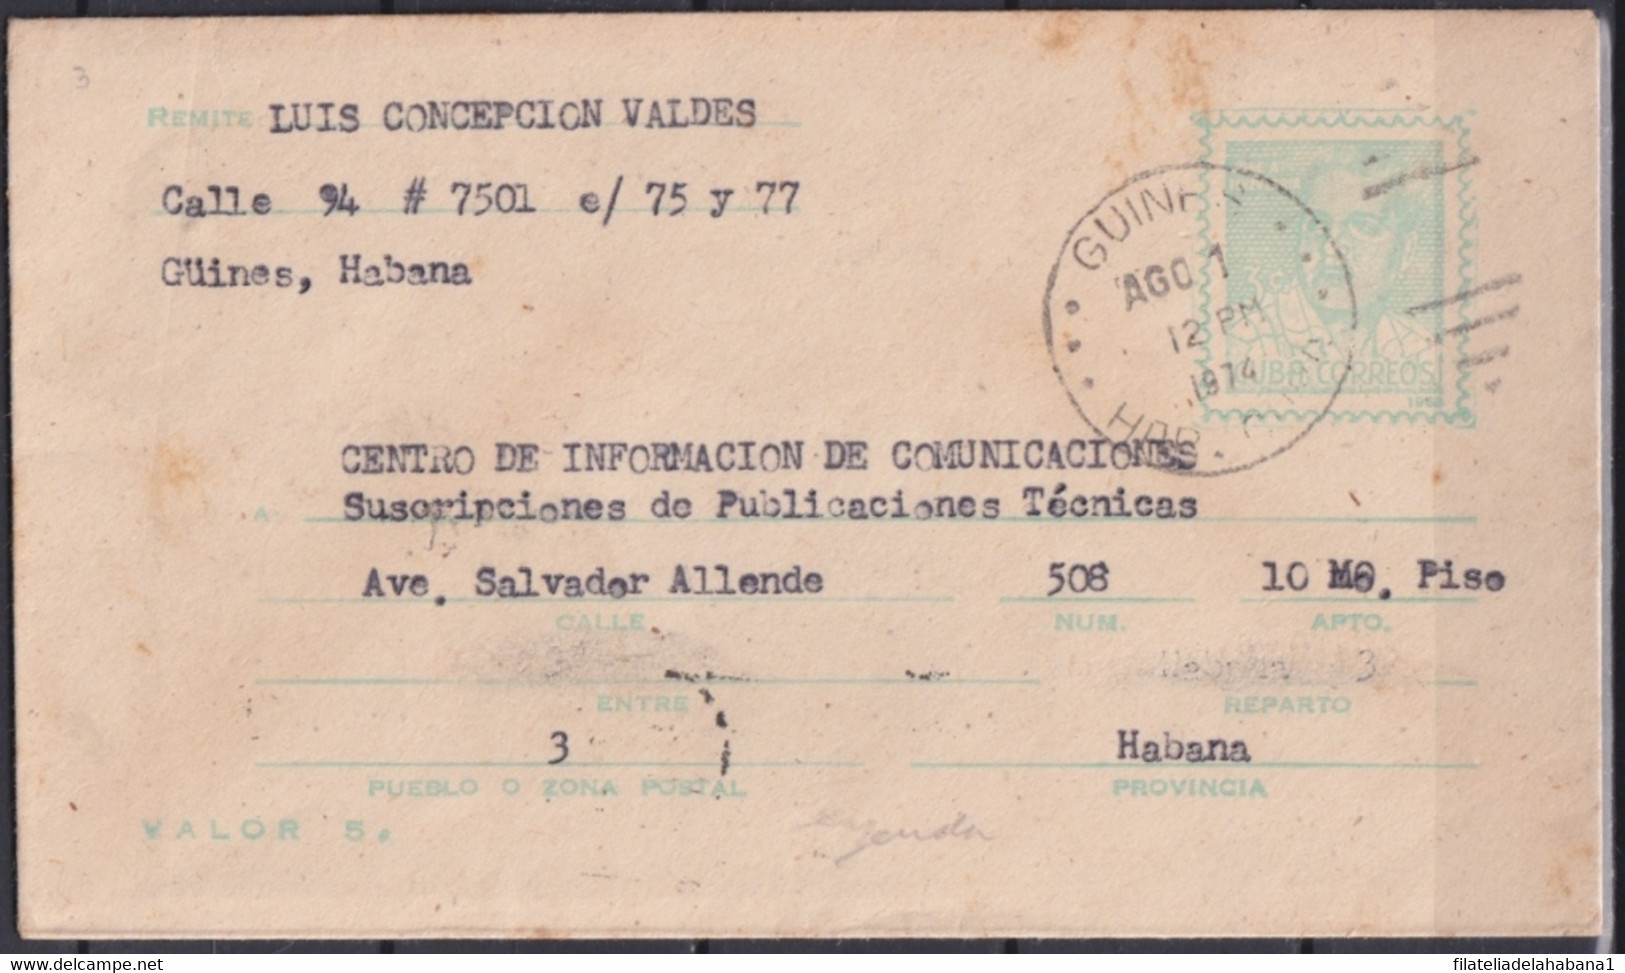 1968-EP-76 CUBA 1968 POSTAL STATIONERY ECHEVARRIA USED GUINES TO HABANA. - Covers & Documents